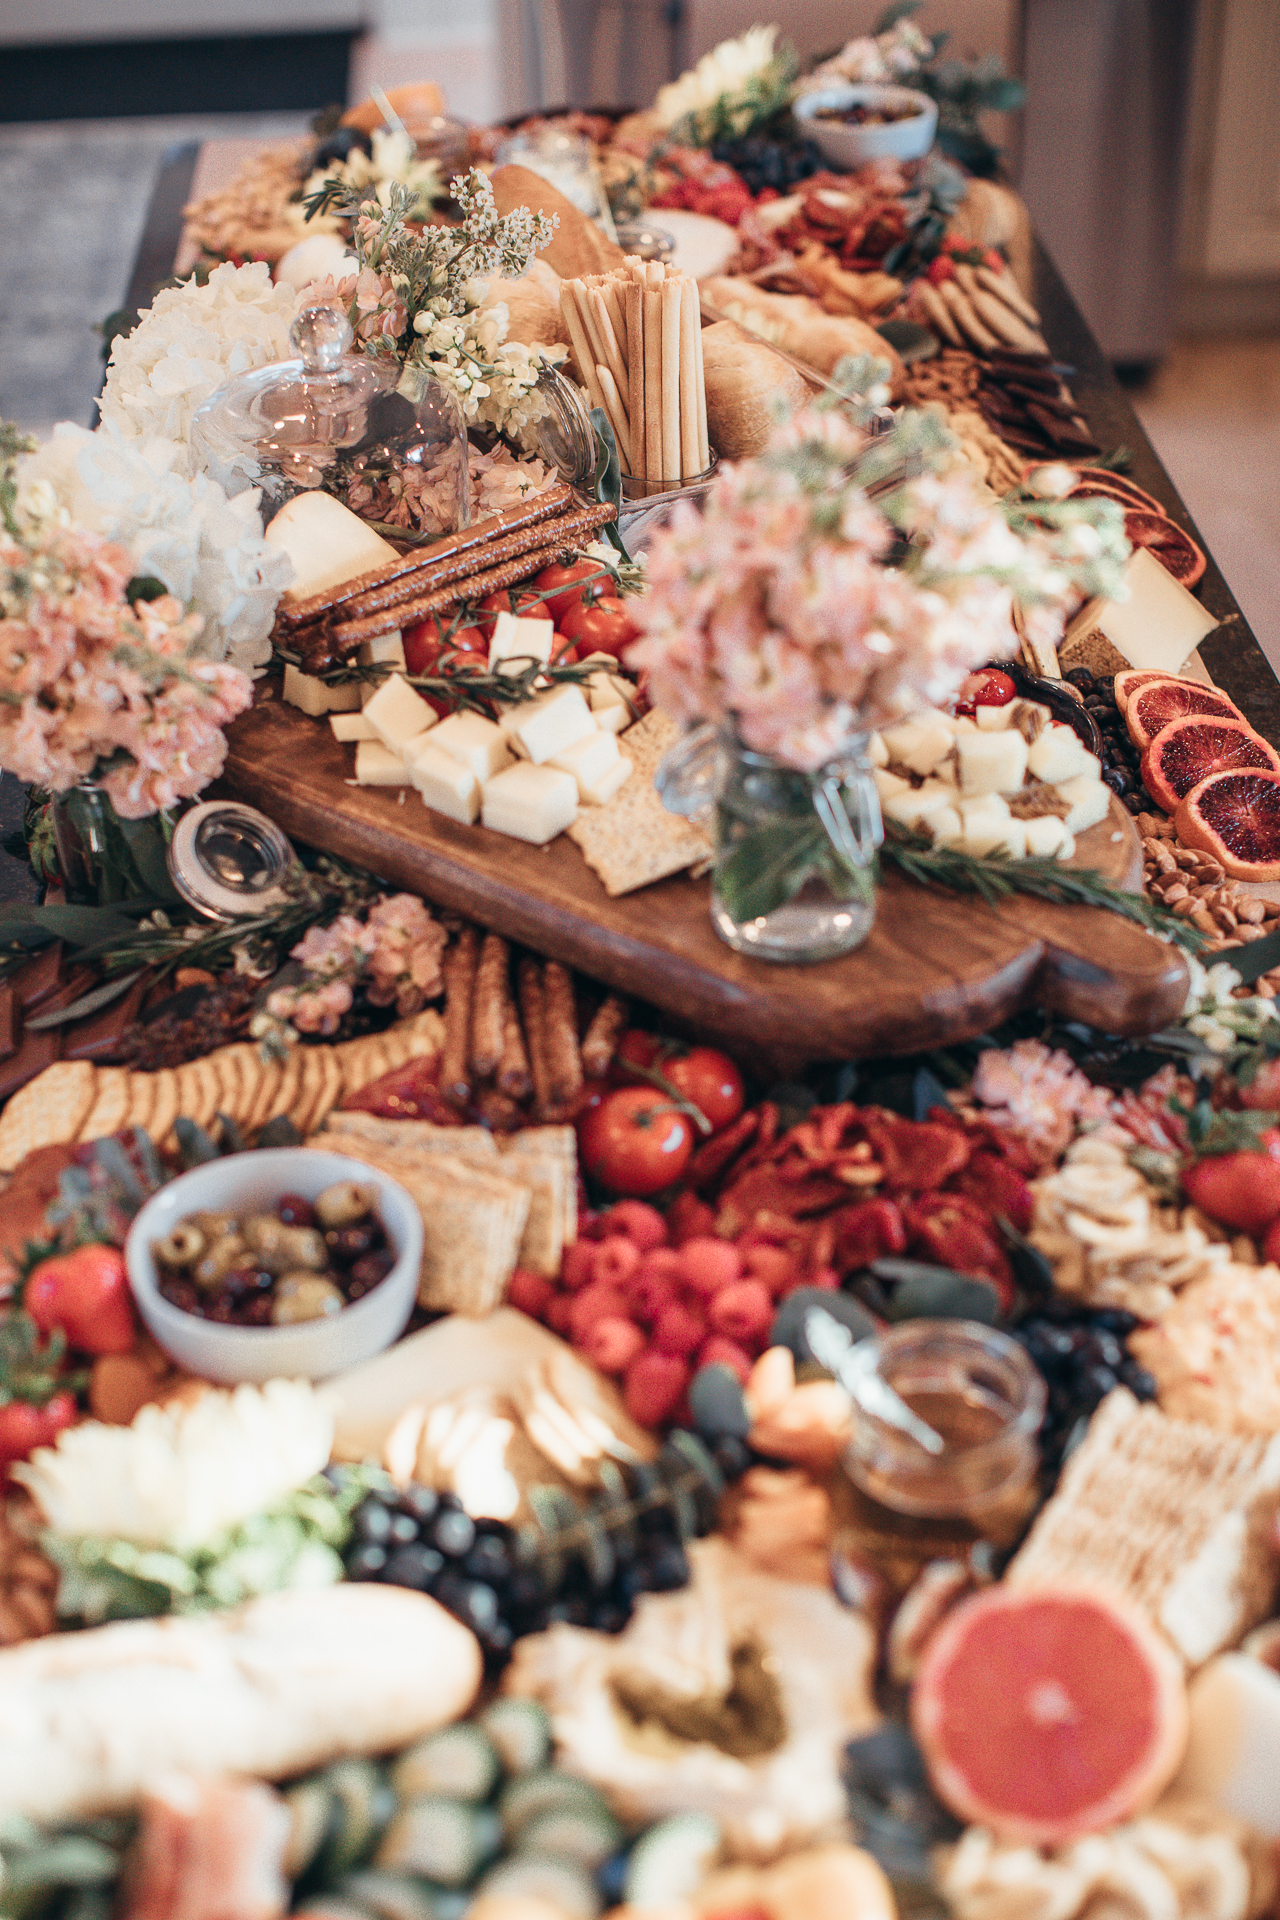 How to Make a Grazing Table for Your Next Party - The E List